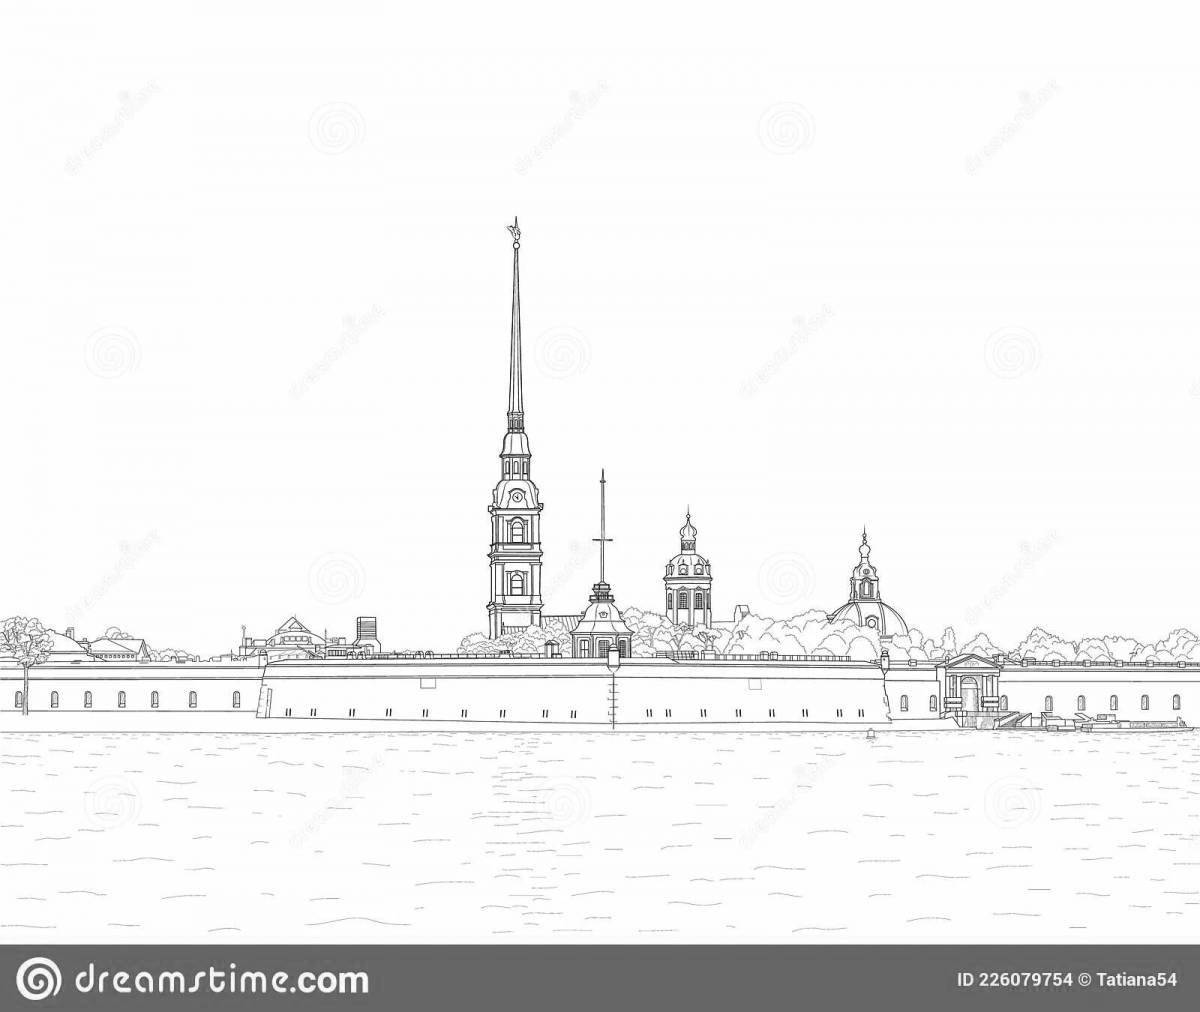 Impressive peter and paul fortress coloring book for kids